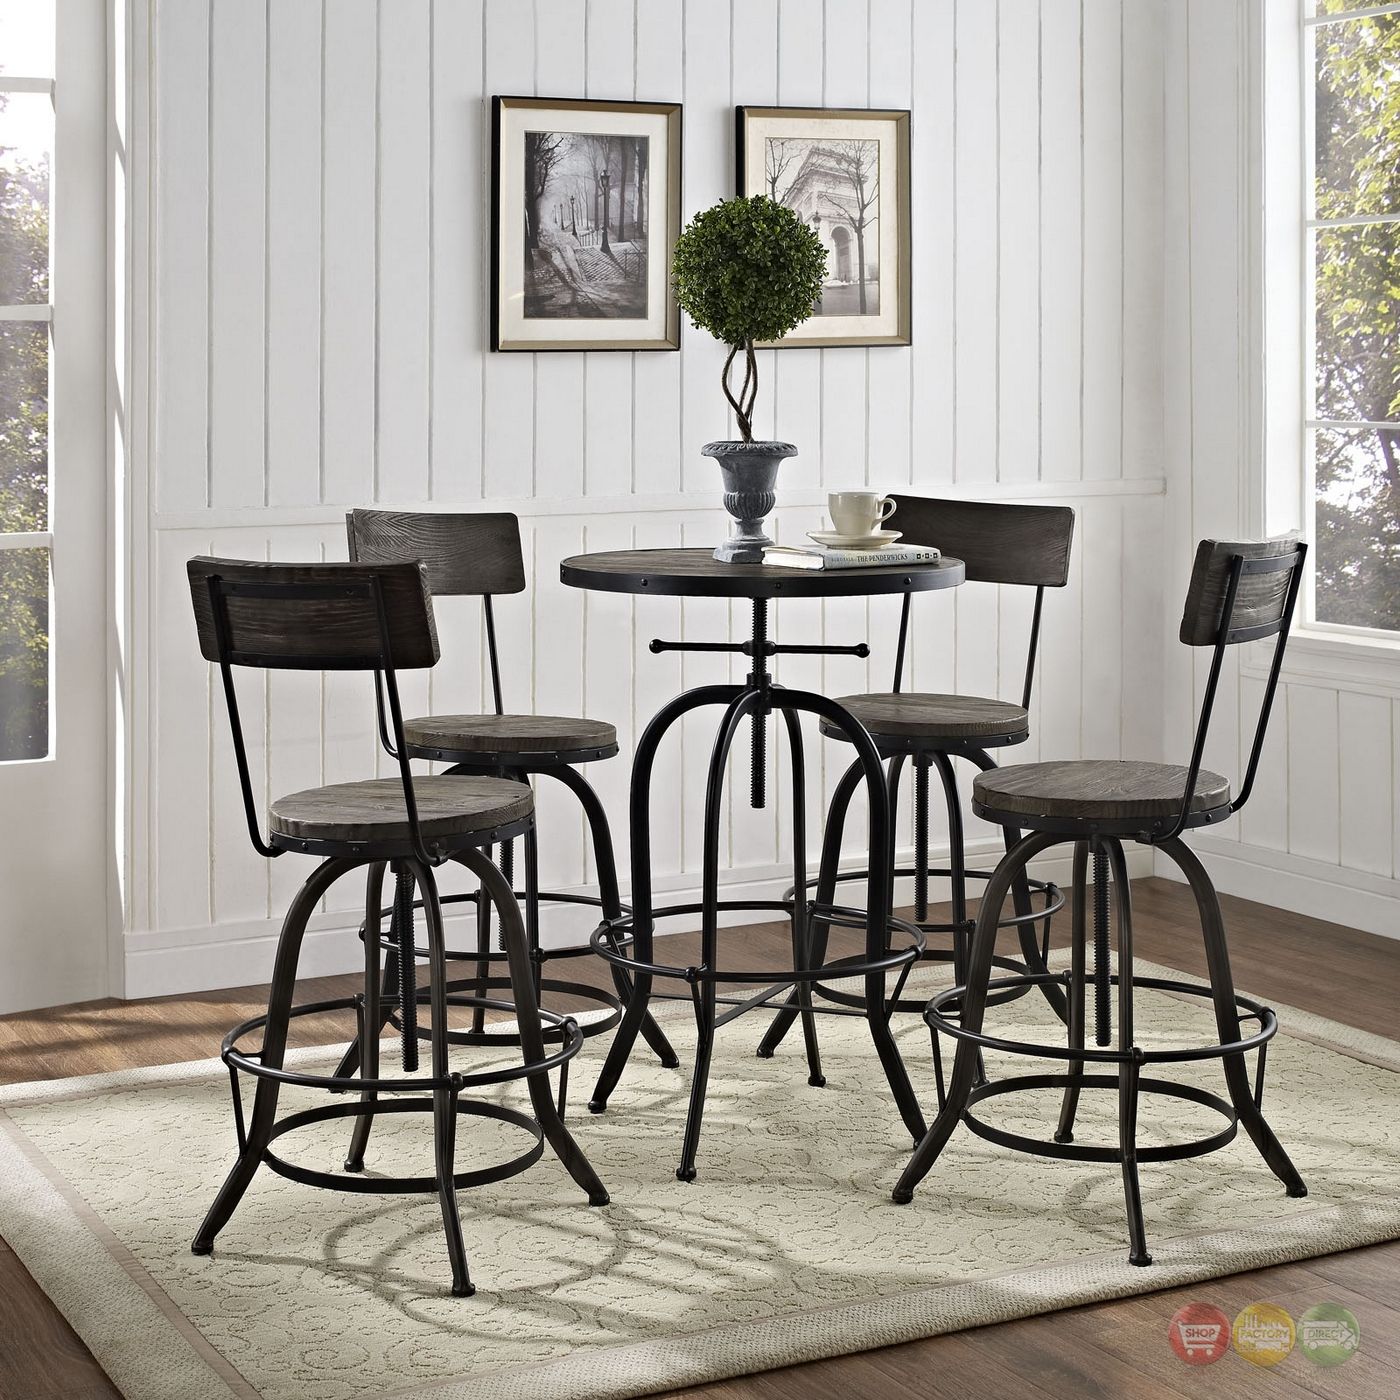 Set Of 4, Procure Industrial Bar Stool W/ Wood Seat Backs & Cast Iron Inside Bar Tables With 4 Counter Stools (View 12 of 15)